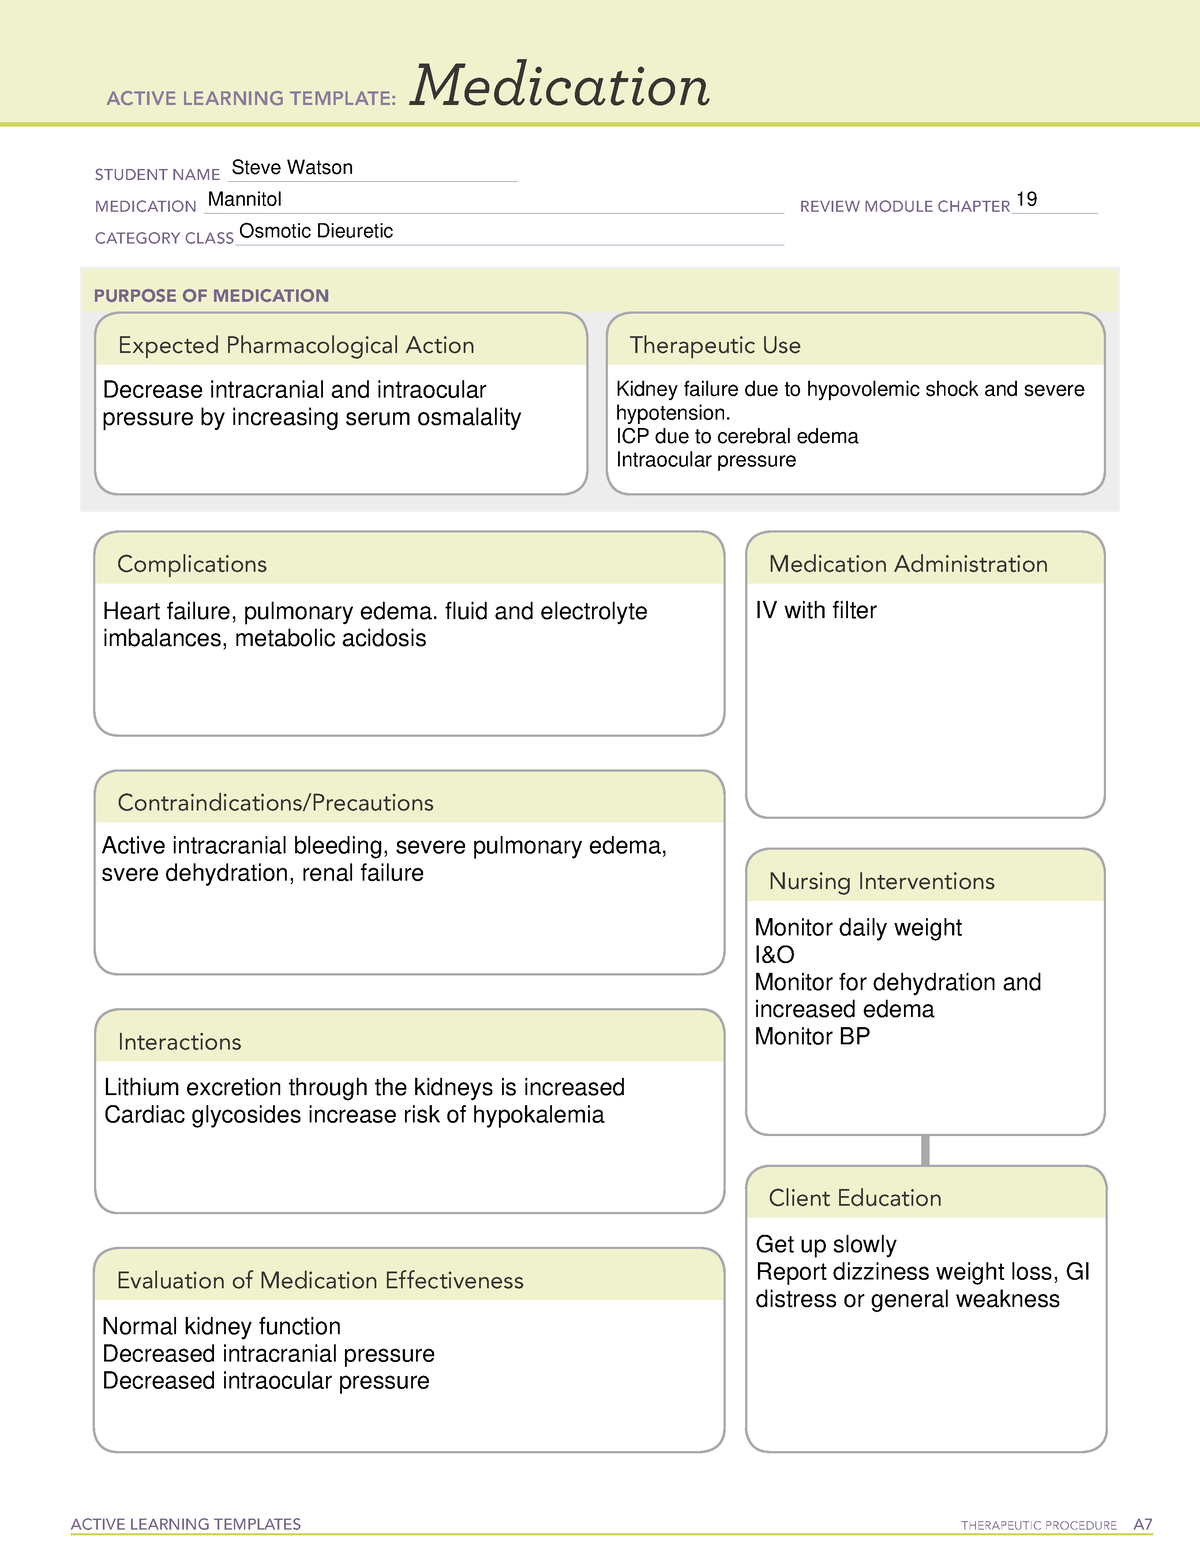 mannitol-ati-template-active-learning-templates-therapeutic-procedure-a-medication-student